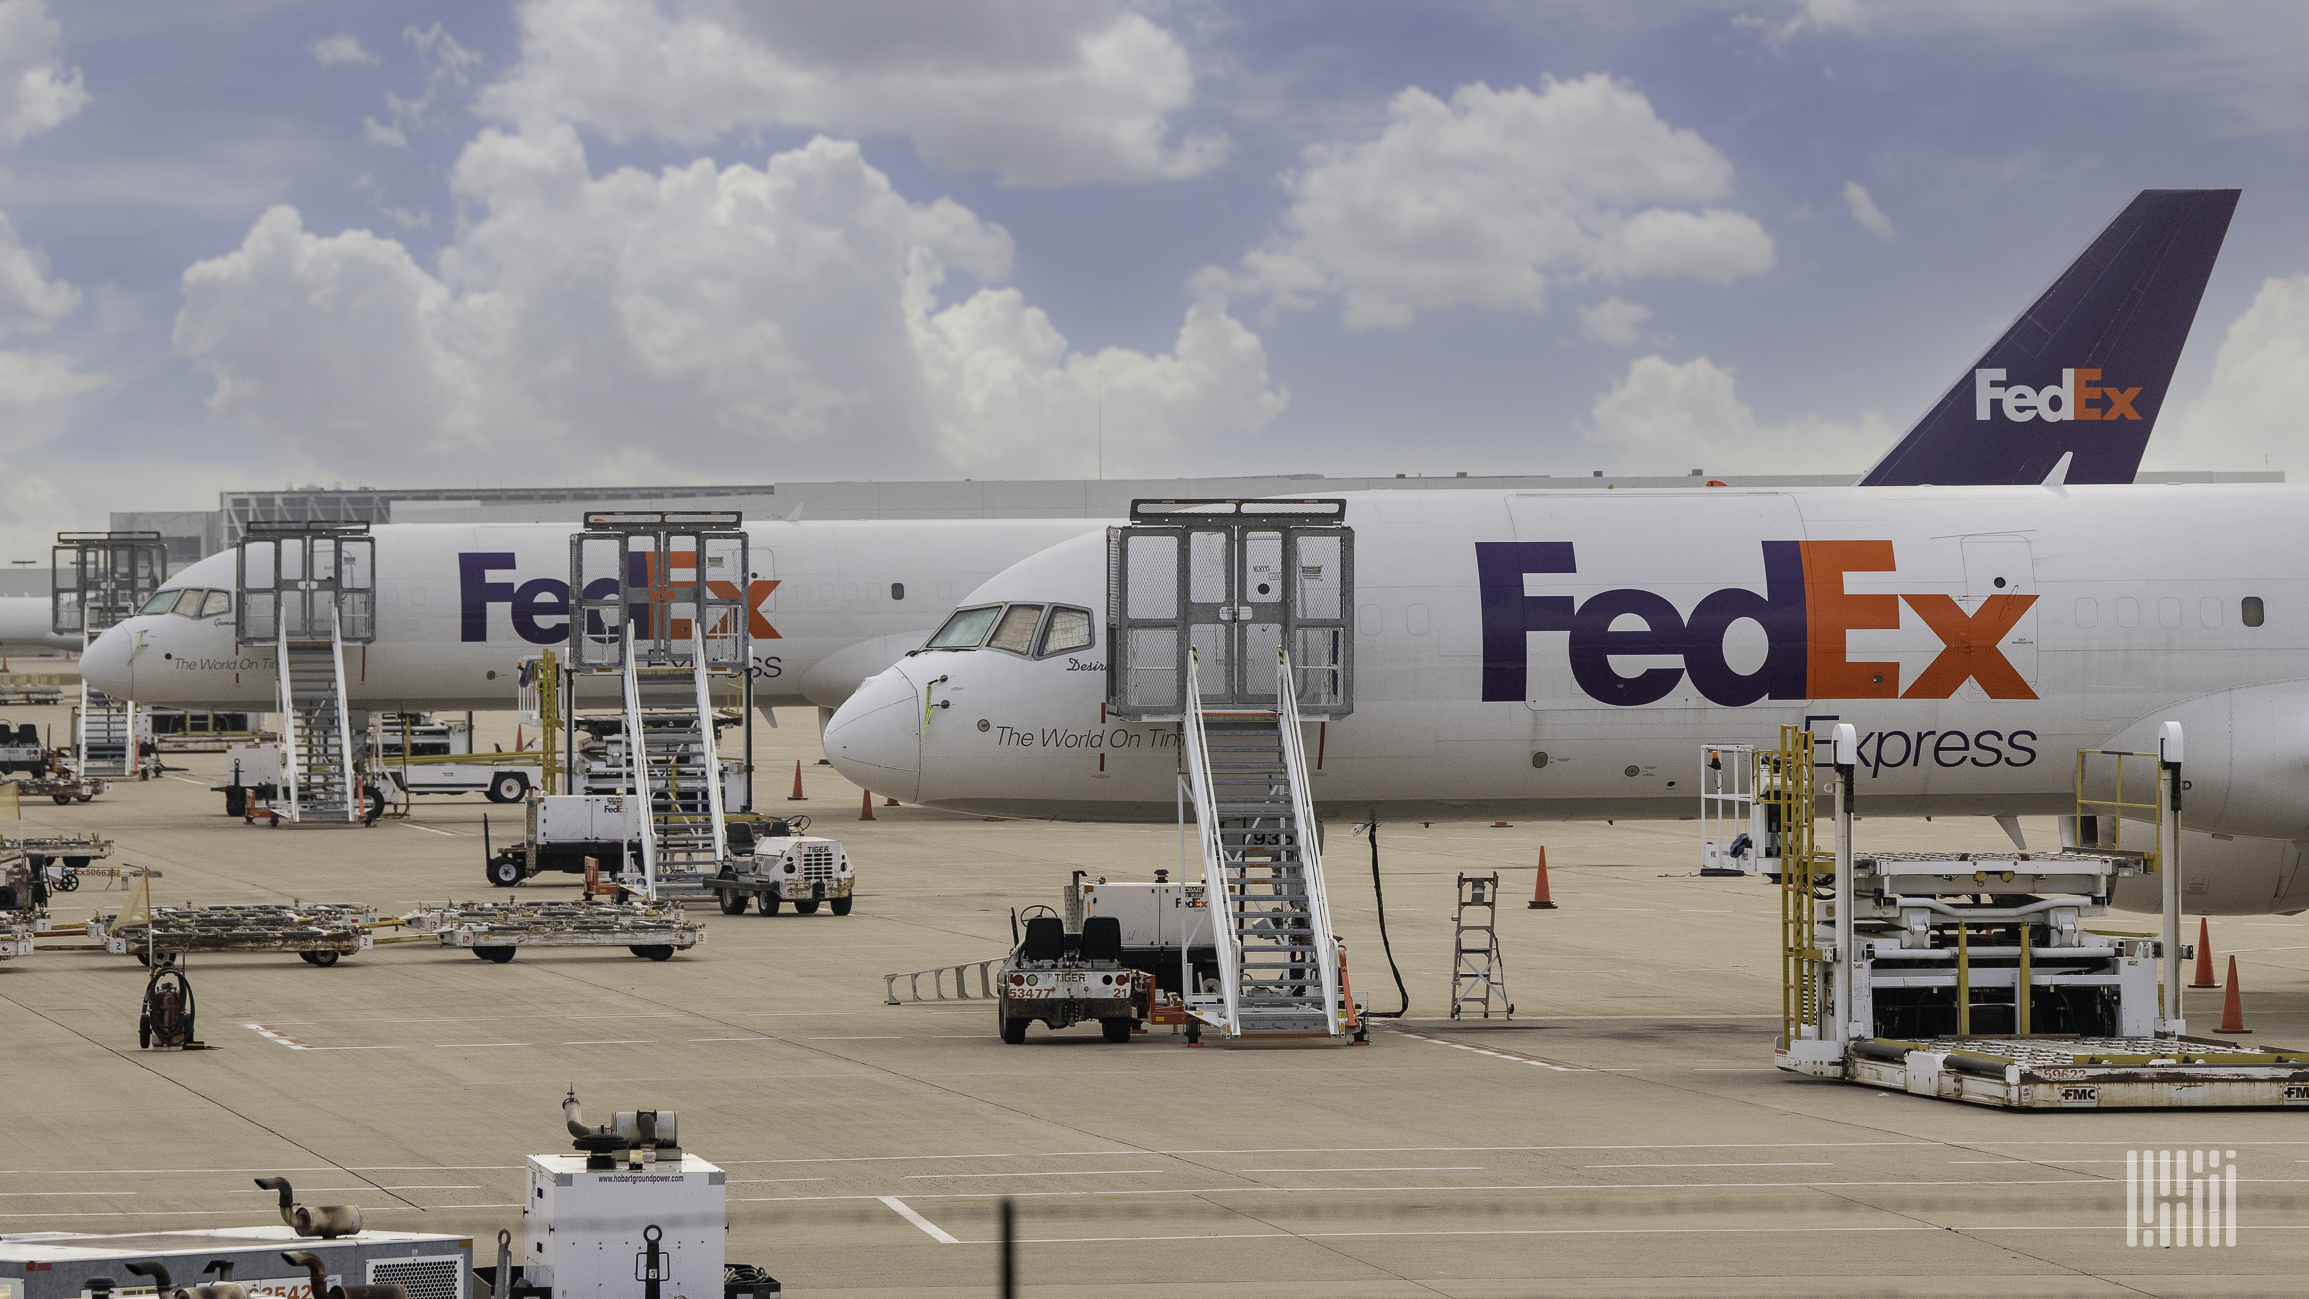 FedEx aircraft on the ground waiting to be loaded on a sunny day.